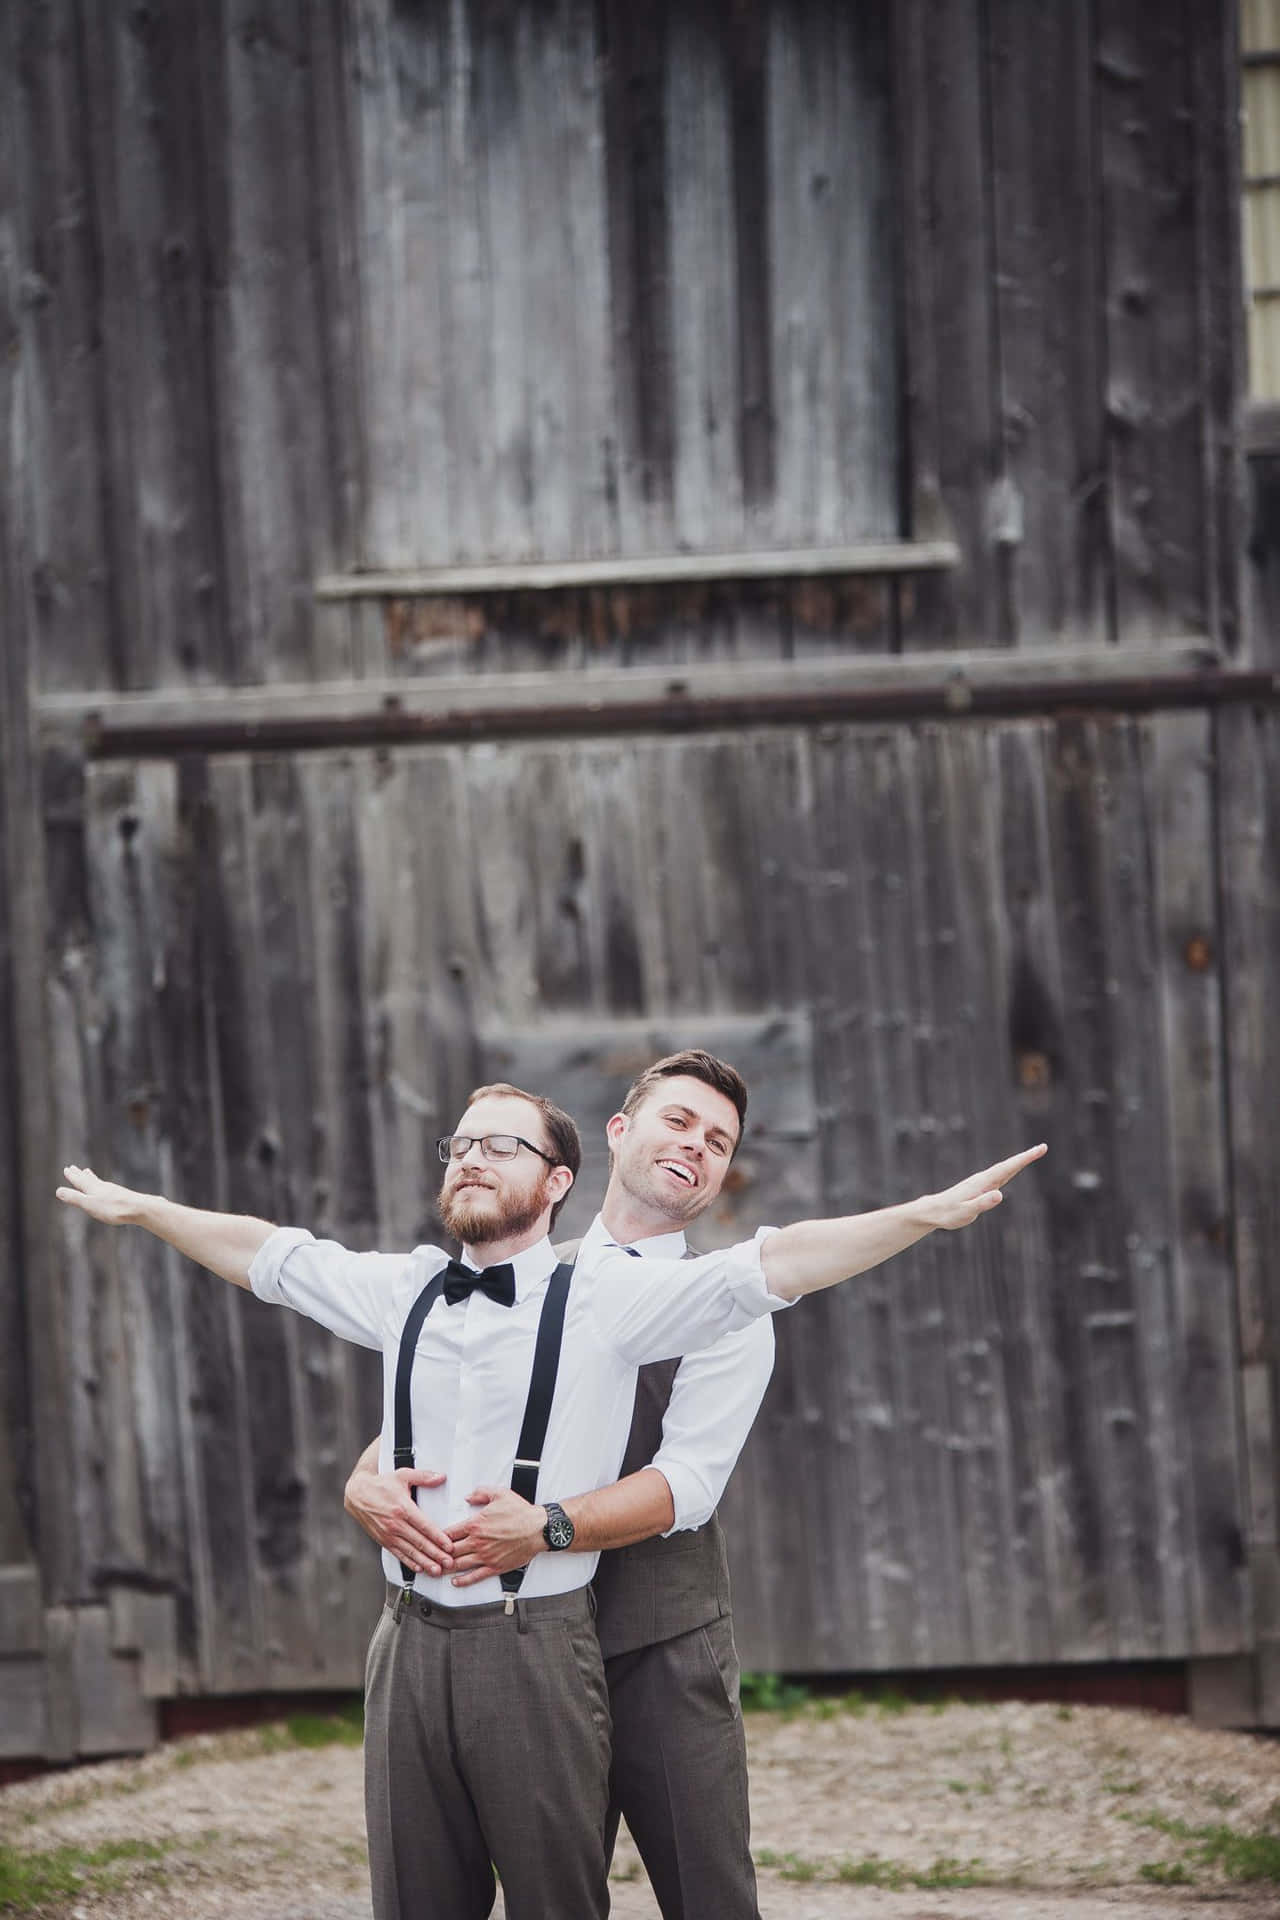 A charming newlywed couple with funny expressions on their special day.